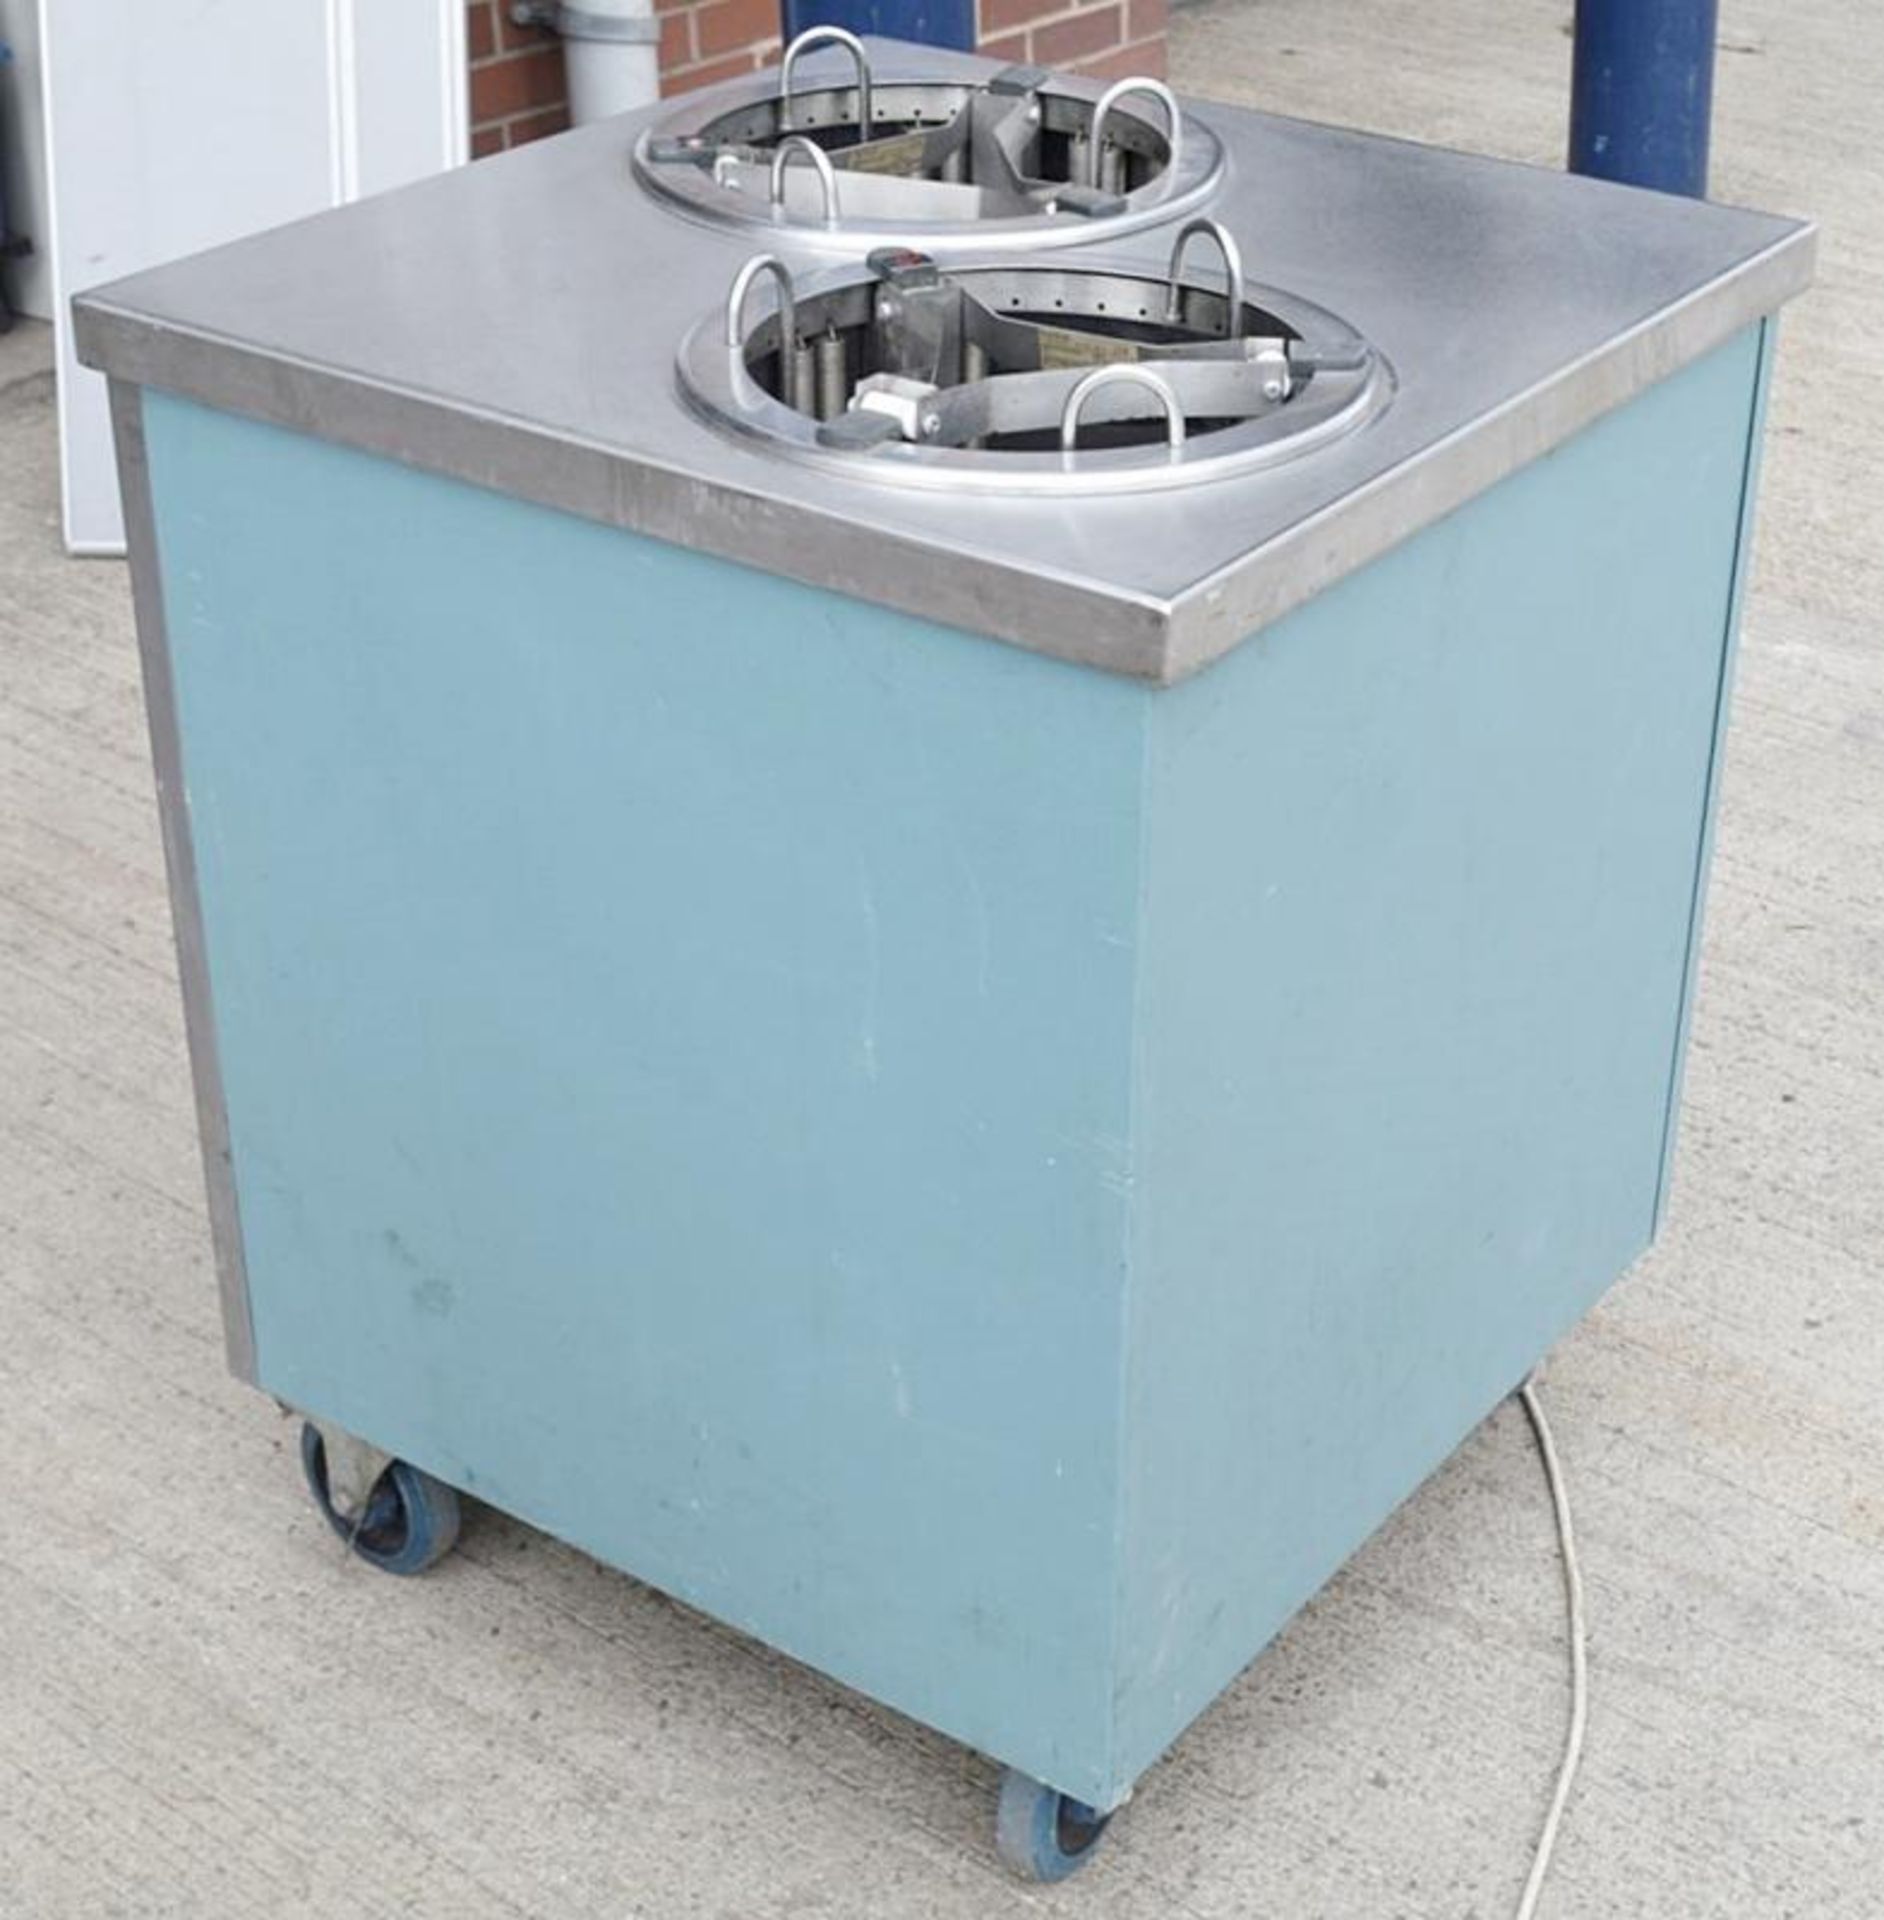 1 x Stainless Steel Double Heated Plate Warmer - Dimensions: W70 x D70 x H87cm - Removed From A Comm - Image 2 of 6